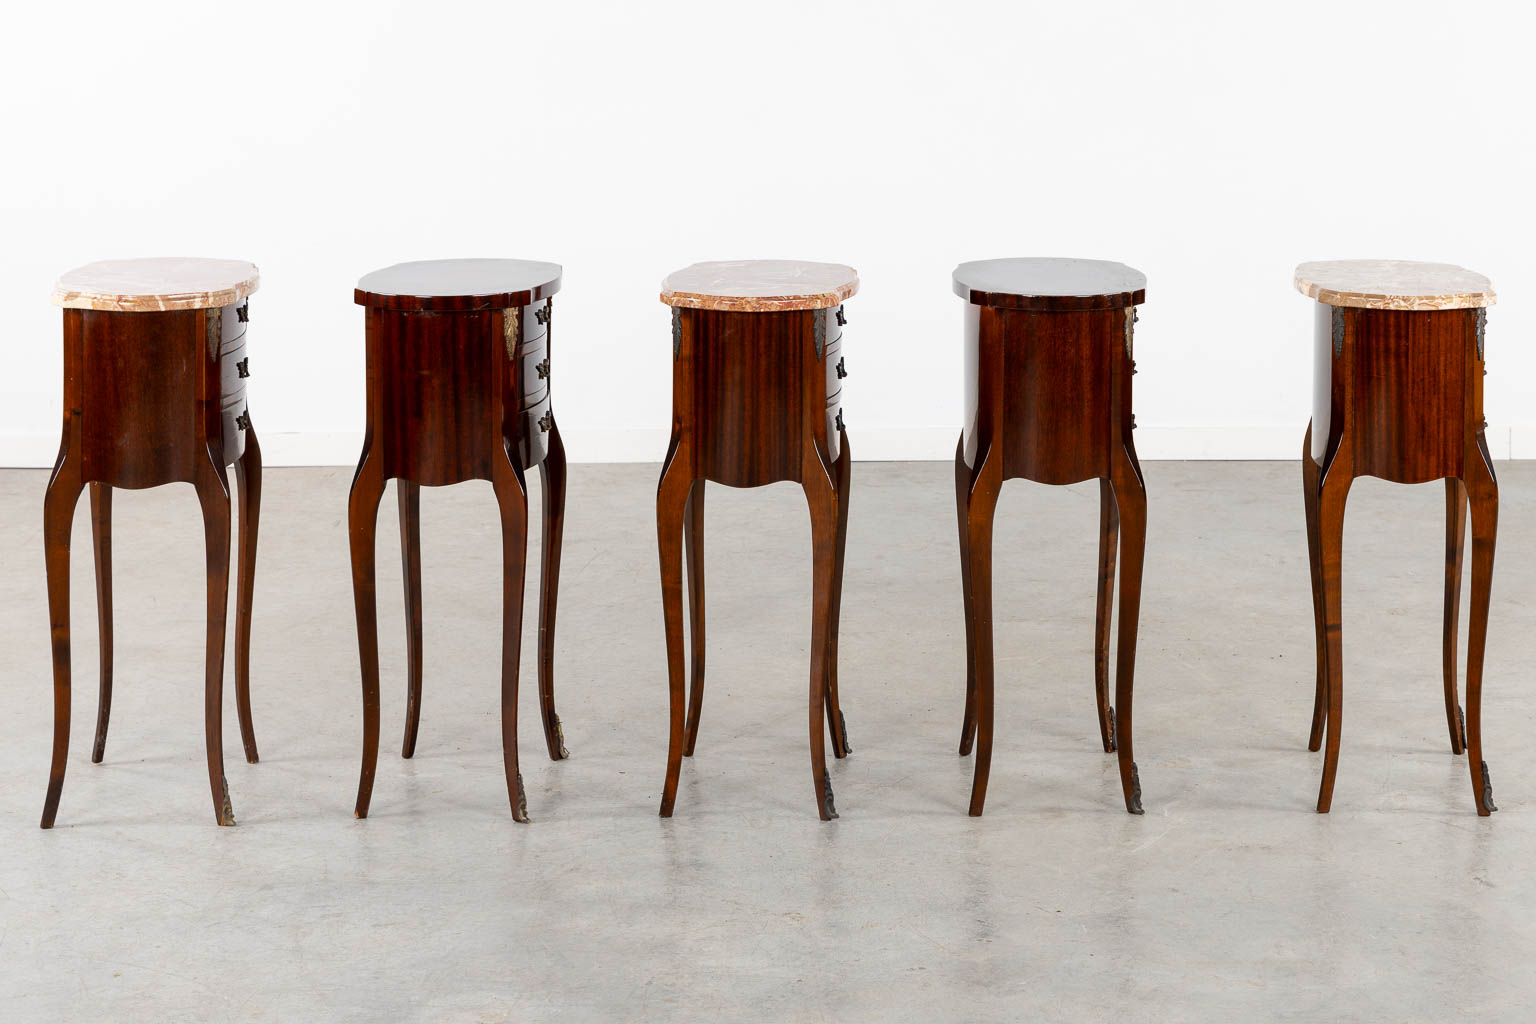 Five side tables or nightstands. (L:27 x W:40 x H:72 cm) - Image 5 of 14